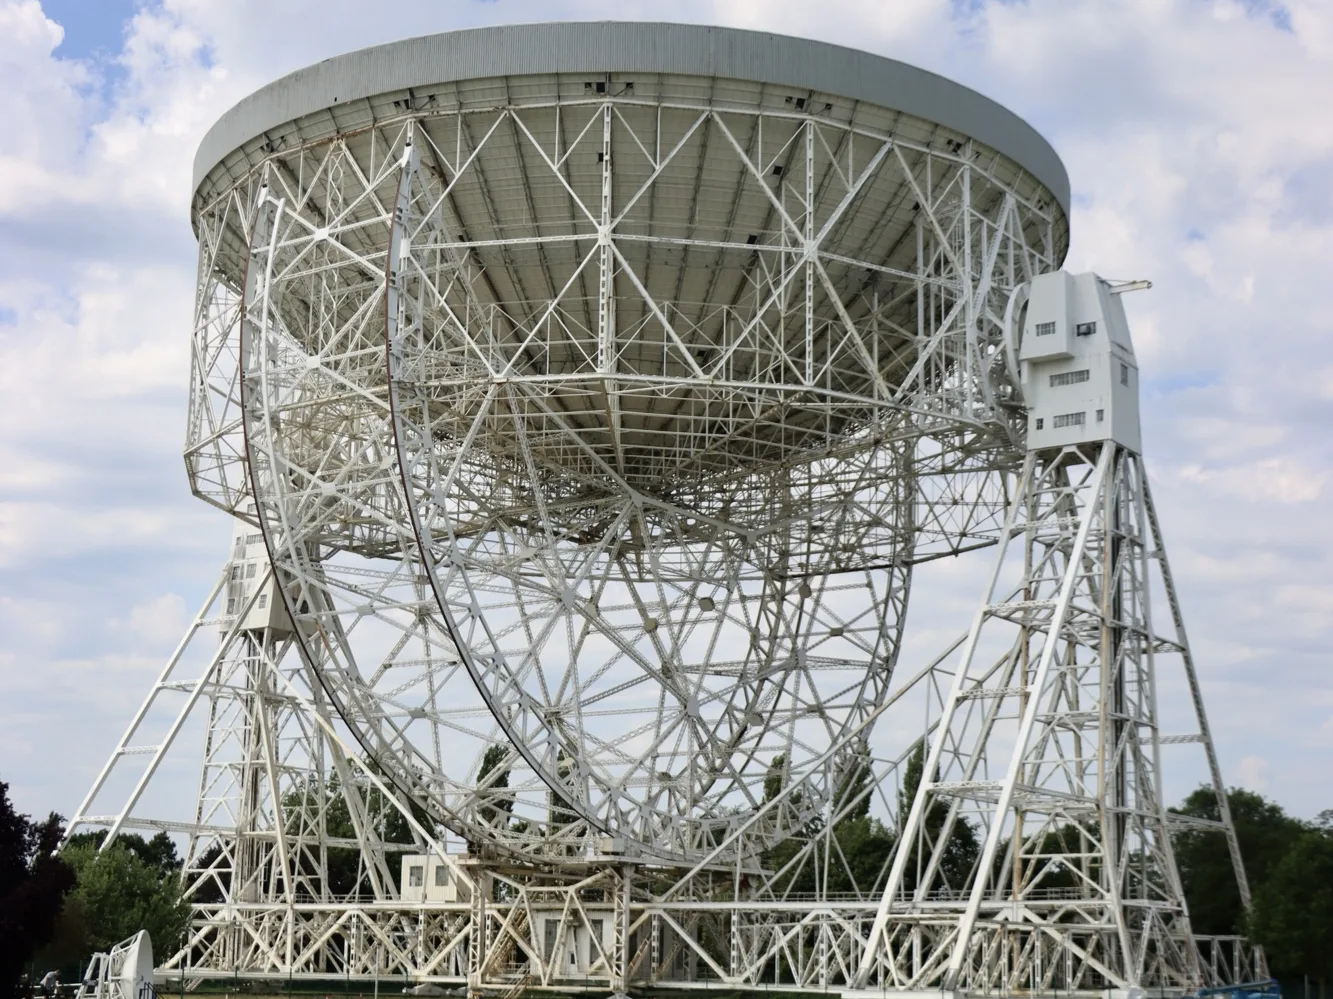 The Lovell Space Telescope which we visited at Jodrell Bank in June 2023.